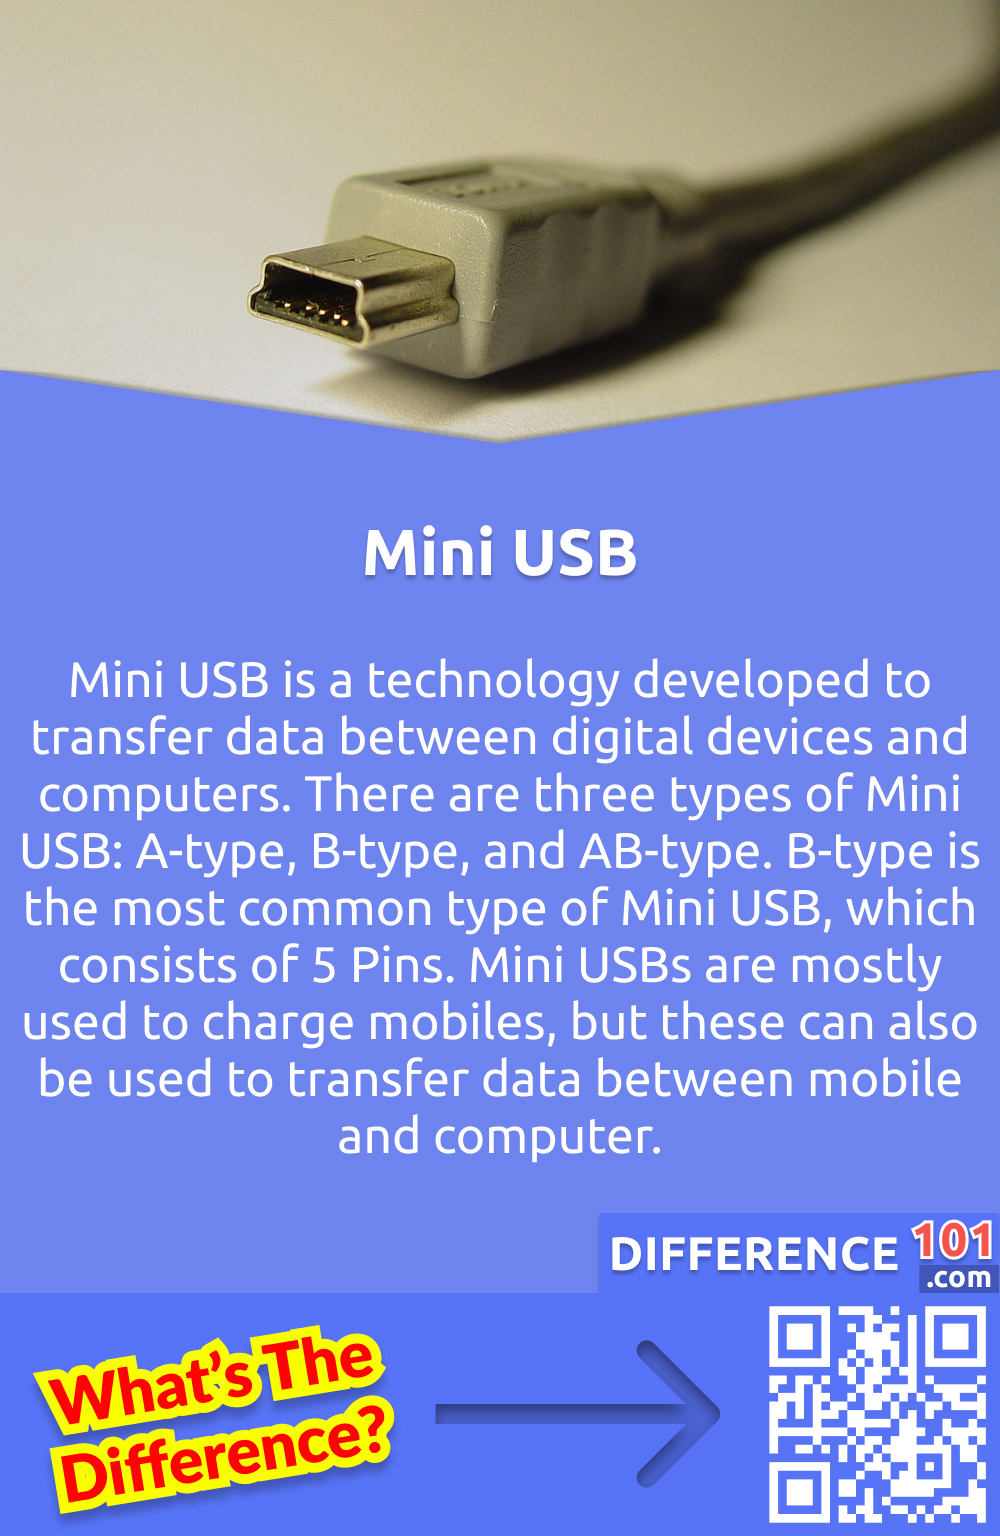 What is Mini USB? Mini USB is a technology developed to transfer data between digital devices and computers. There are three types of Mini USB: A-type, B-type, and AB-type. B-type is the most common type of Mini USB, which consists of 5 Pins. Mini USBs are mostly used to charge mobiles, but these can also be used to transfer data between mobile and computer.